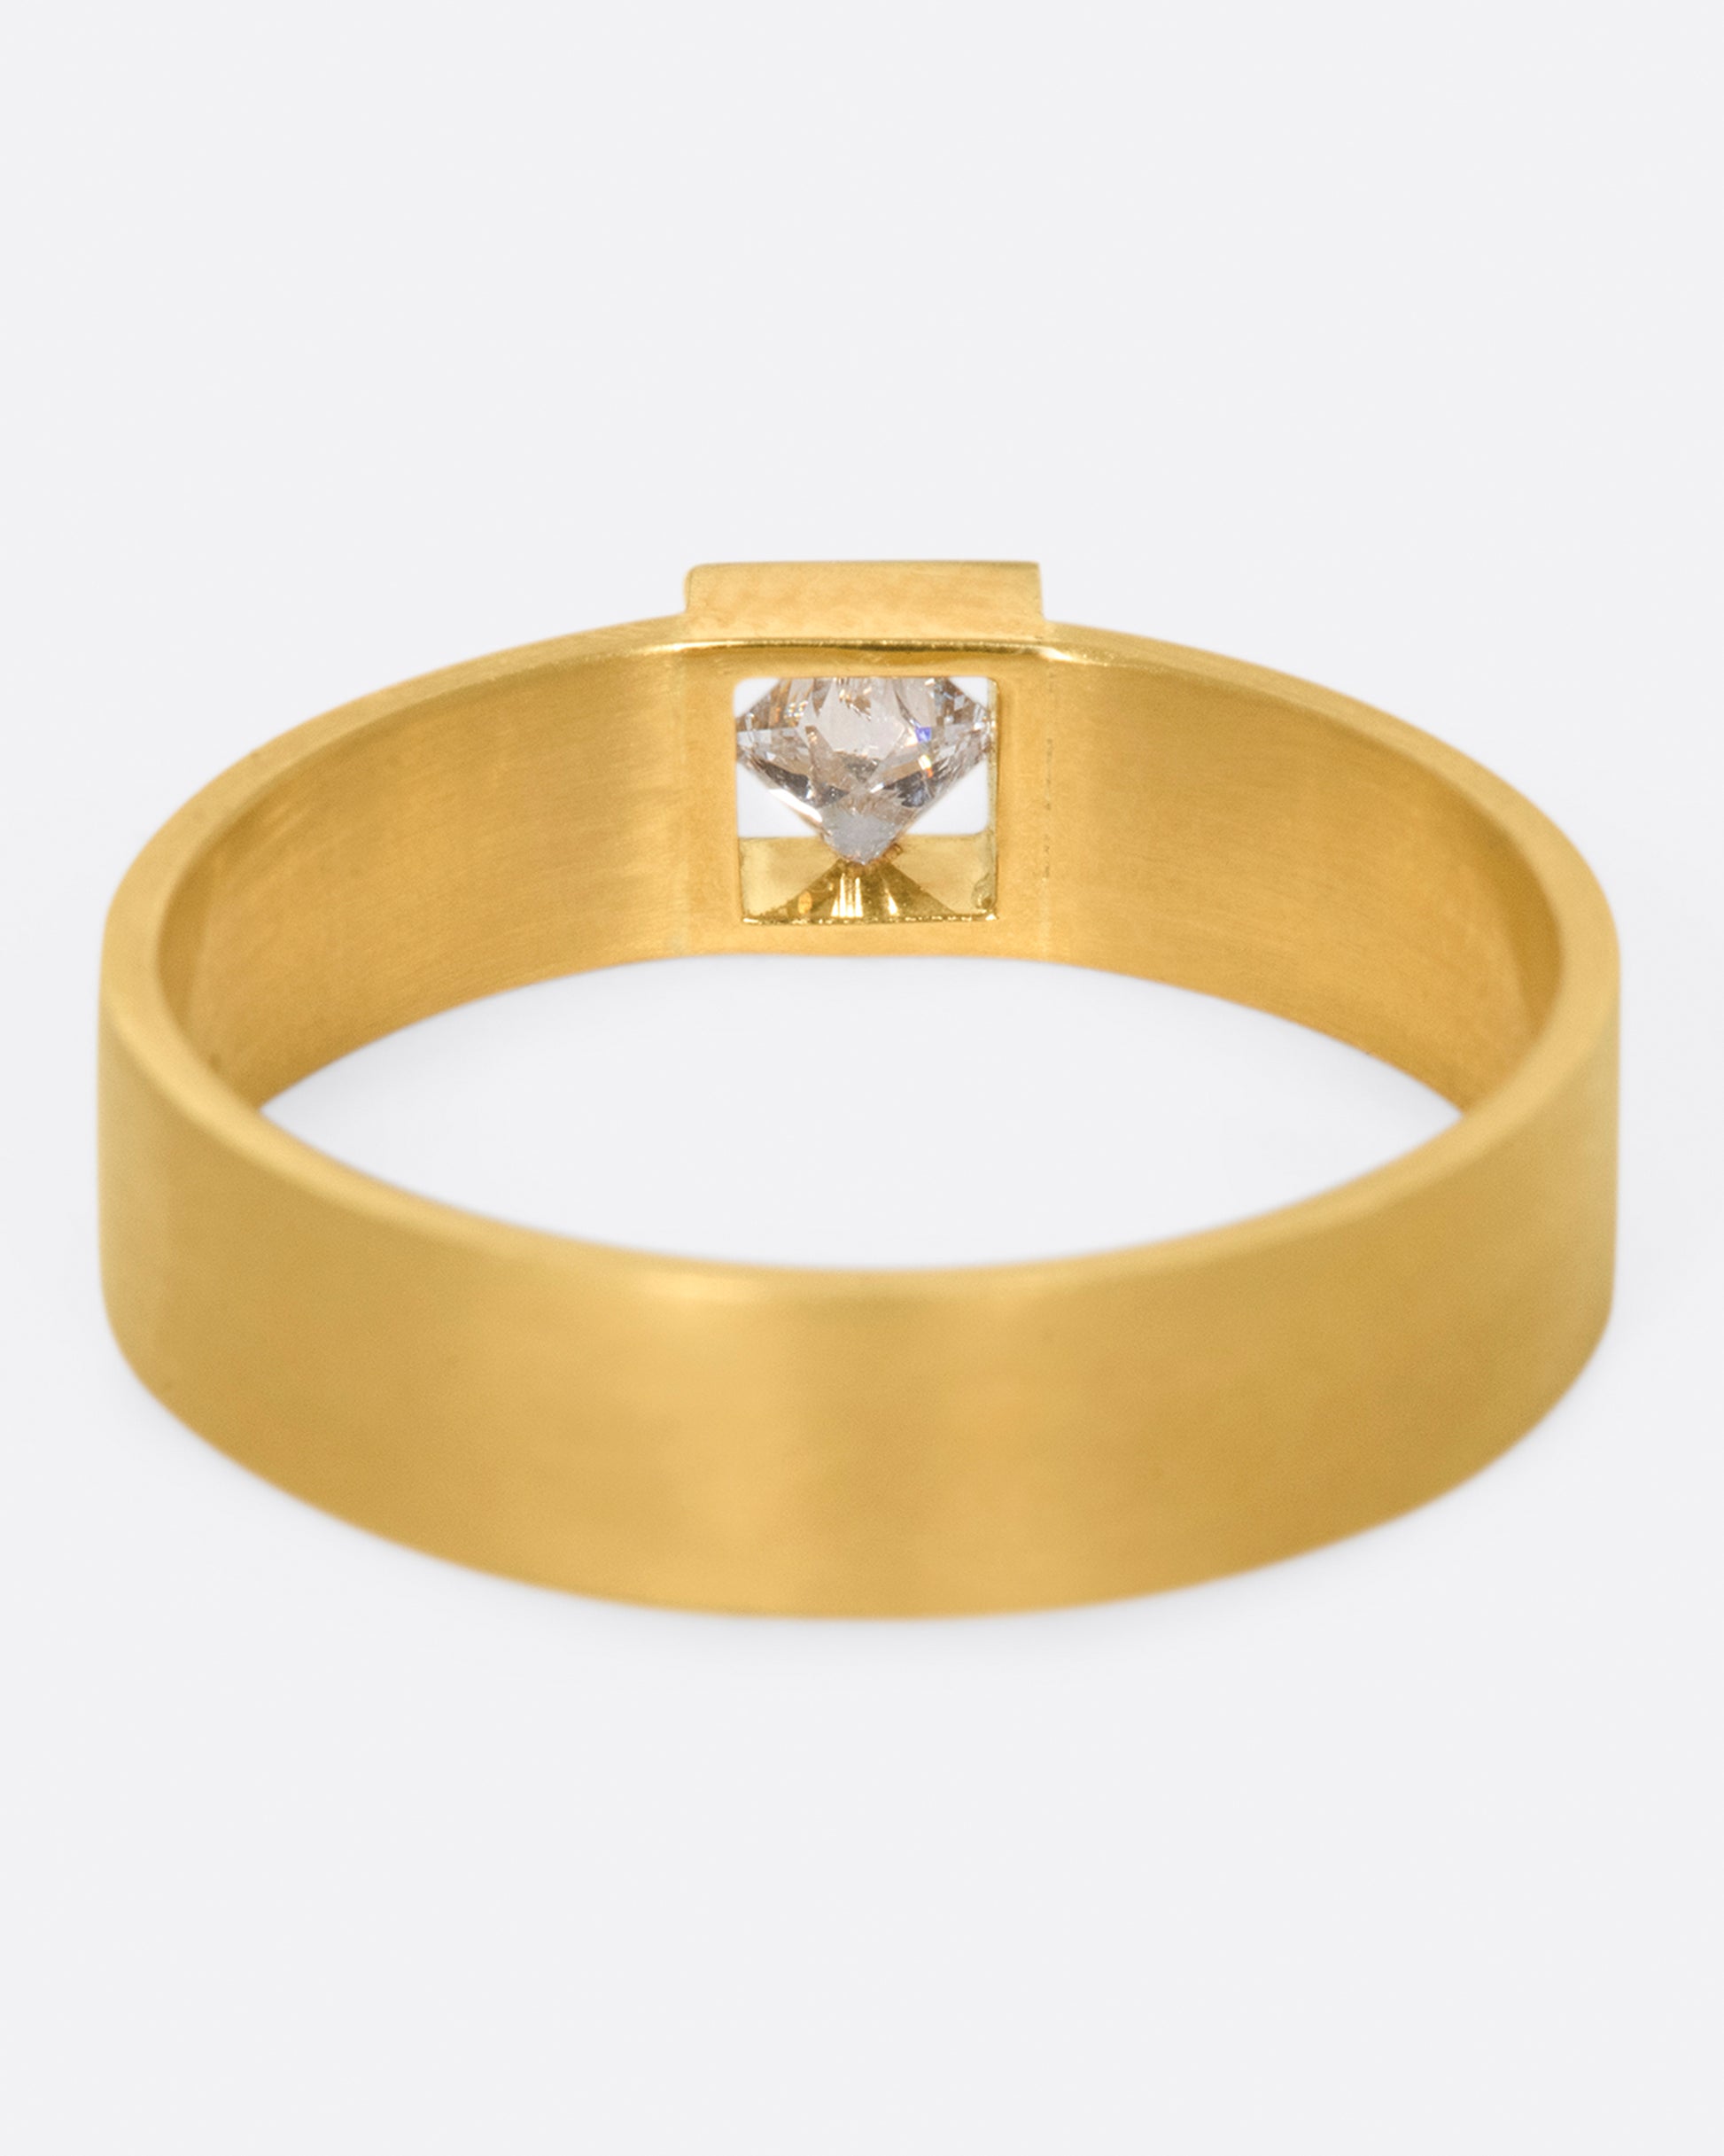 A wide, matte band ring with a princess cut diamond set at its center.